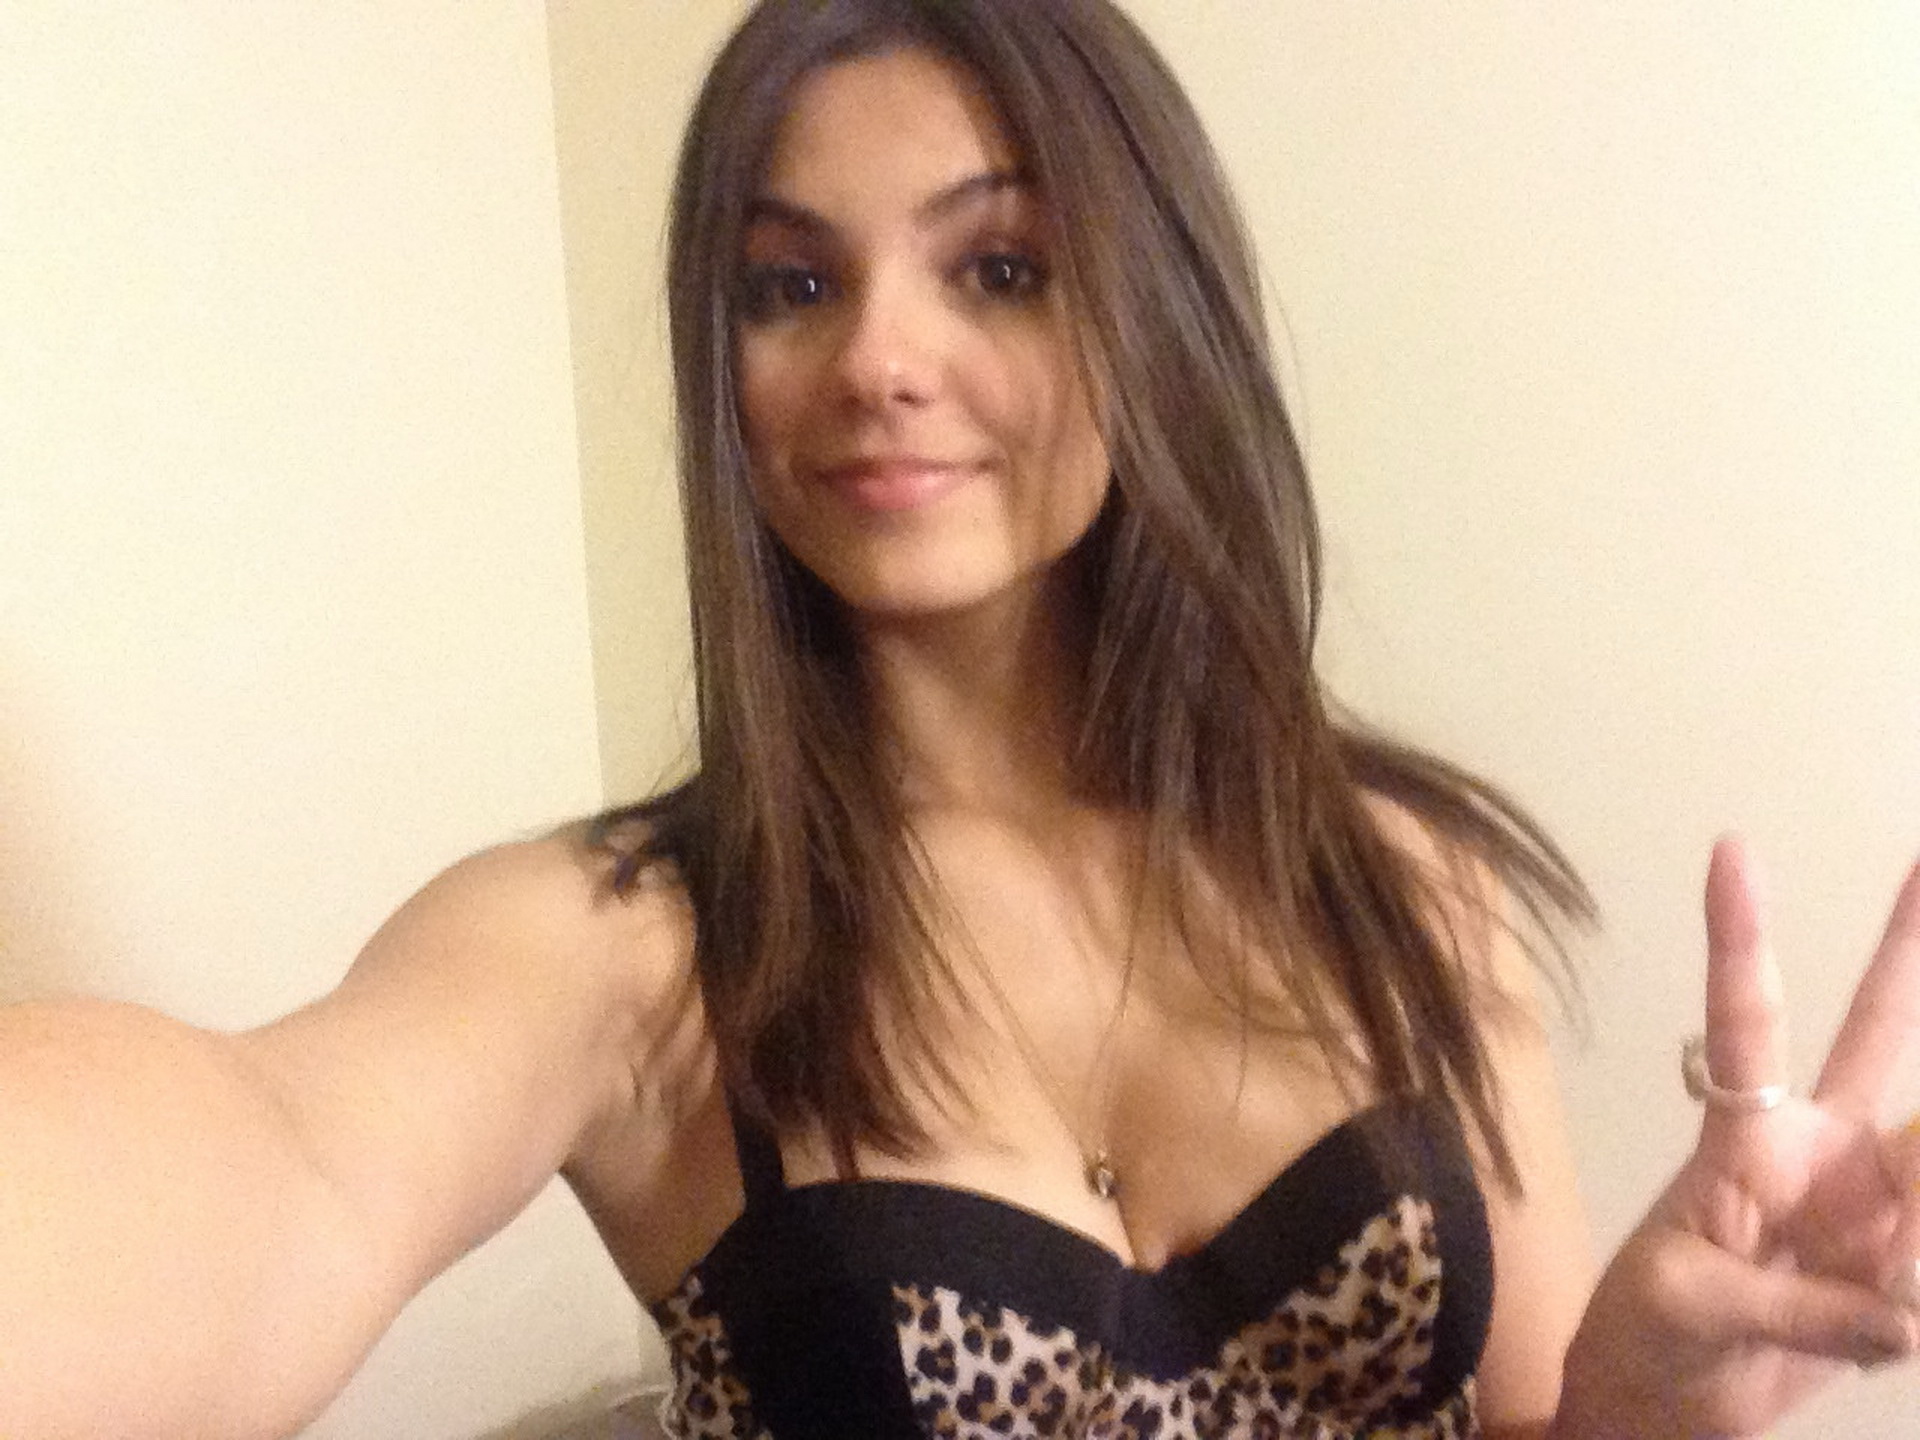 Victoria_Justice_leaked_private_nude_photo_hacked_personal_naked_pics_36x_MixQ_39.jpg